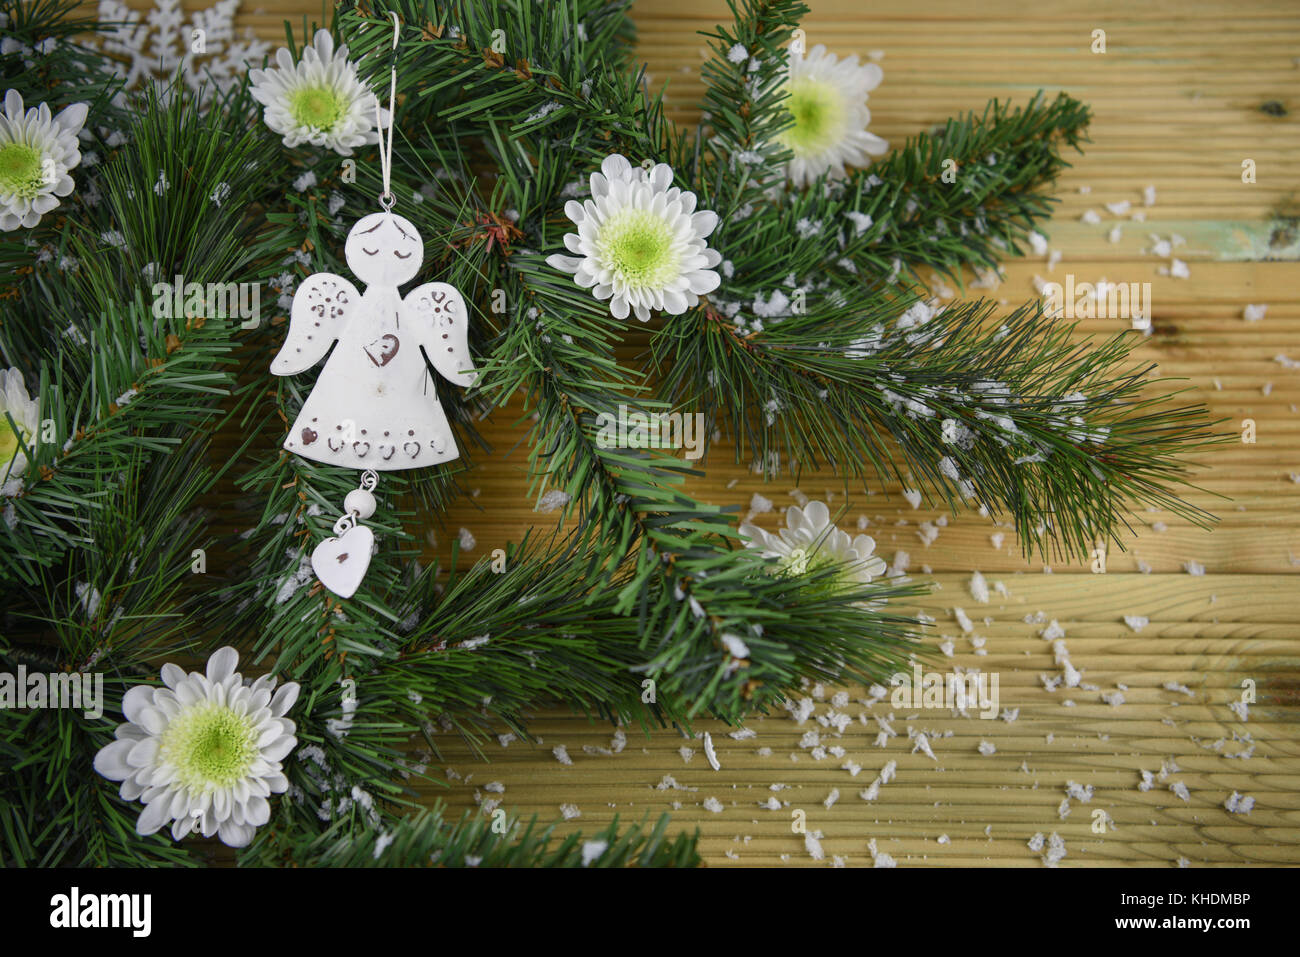 Festive winter tree decorations with large silky poinsettia flowers,  glitter tree balls and golden mesh ribbons, seasonal Christmas ornamentas  Stock Photo - Alamy